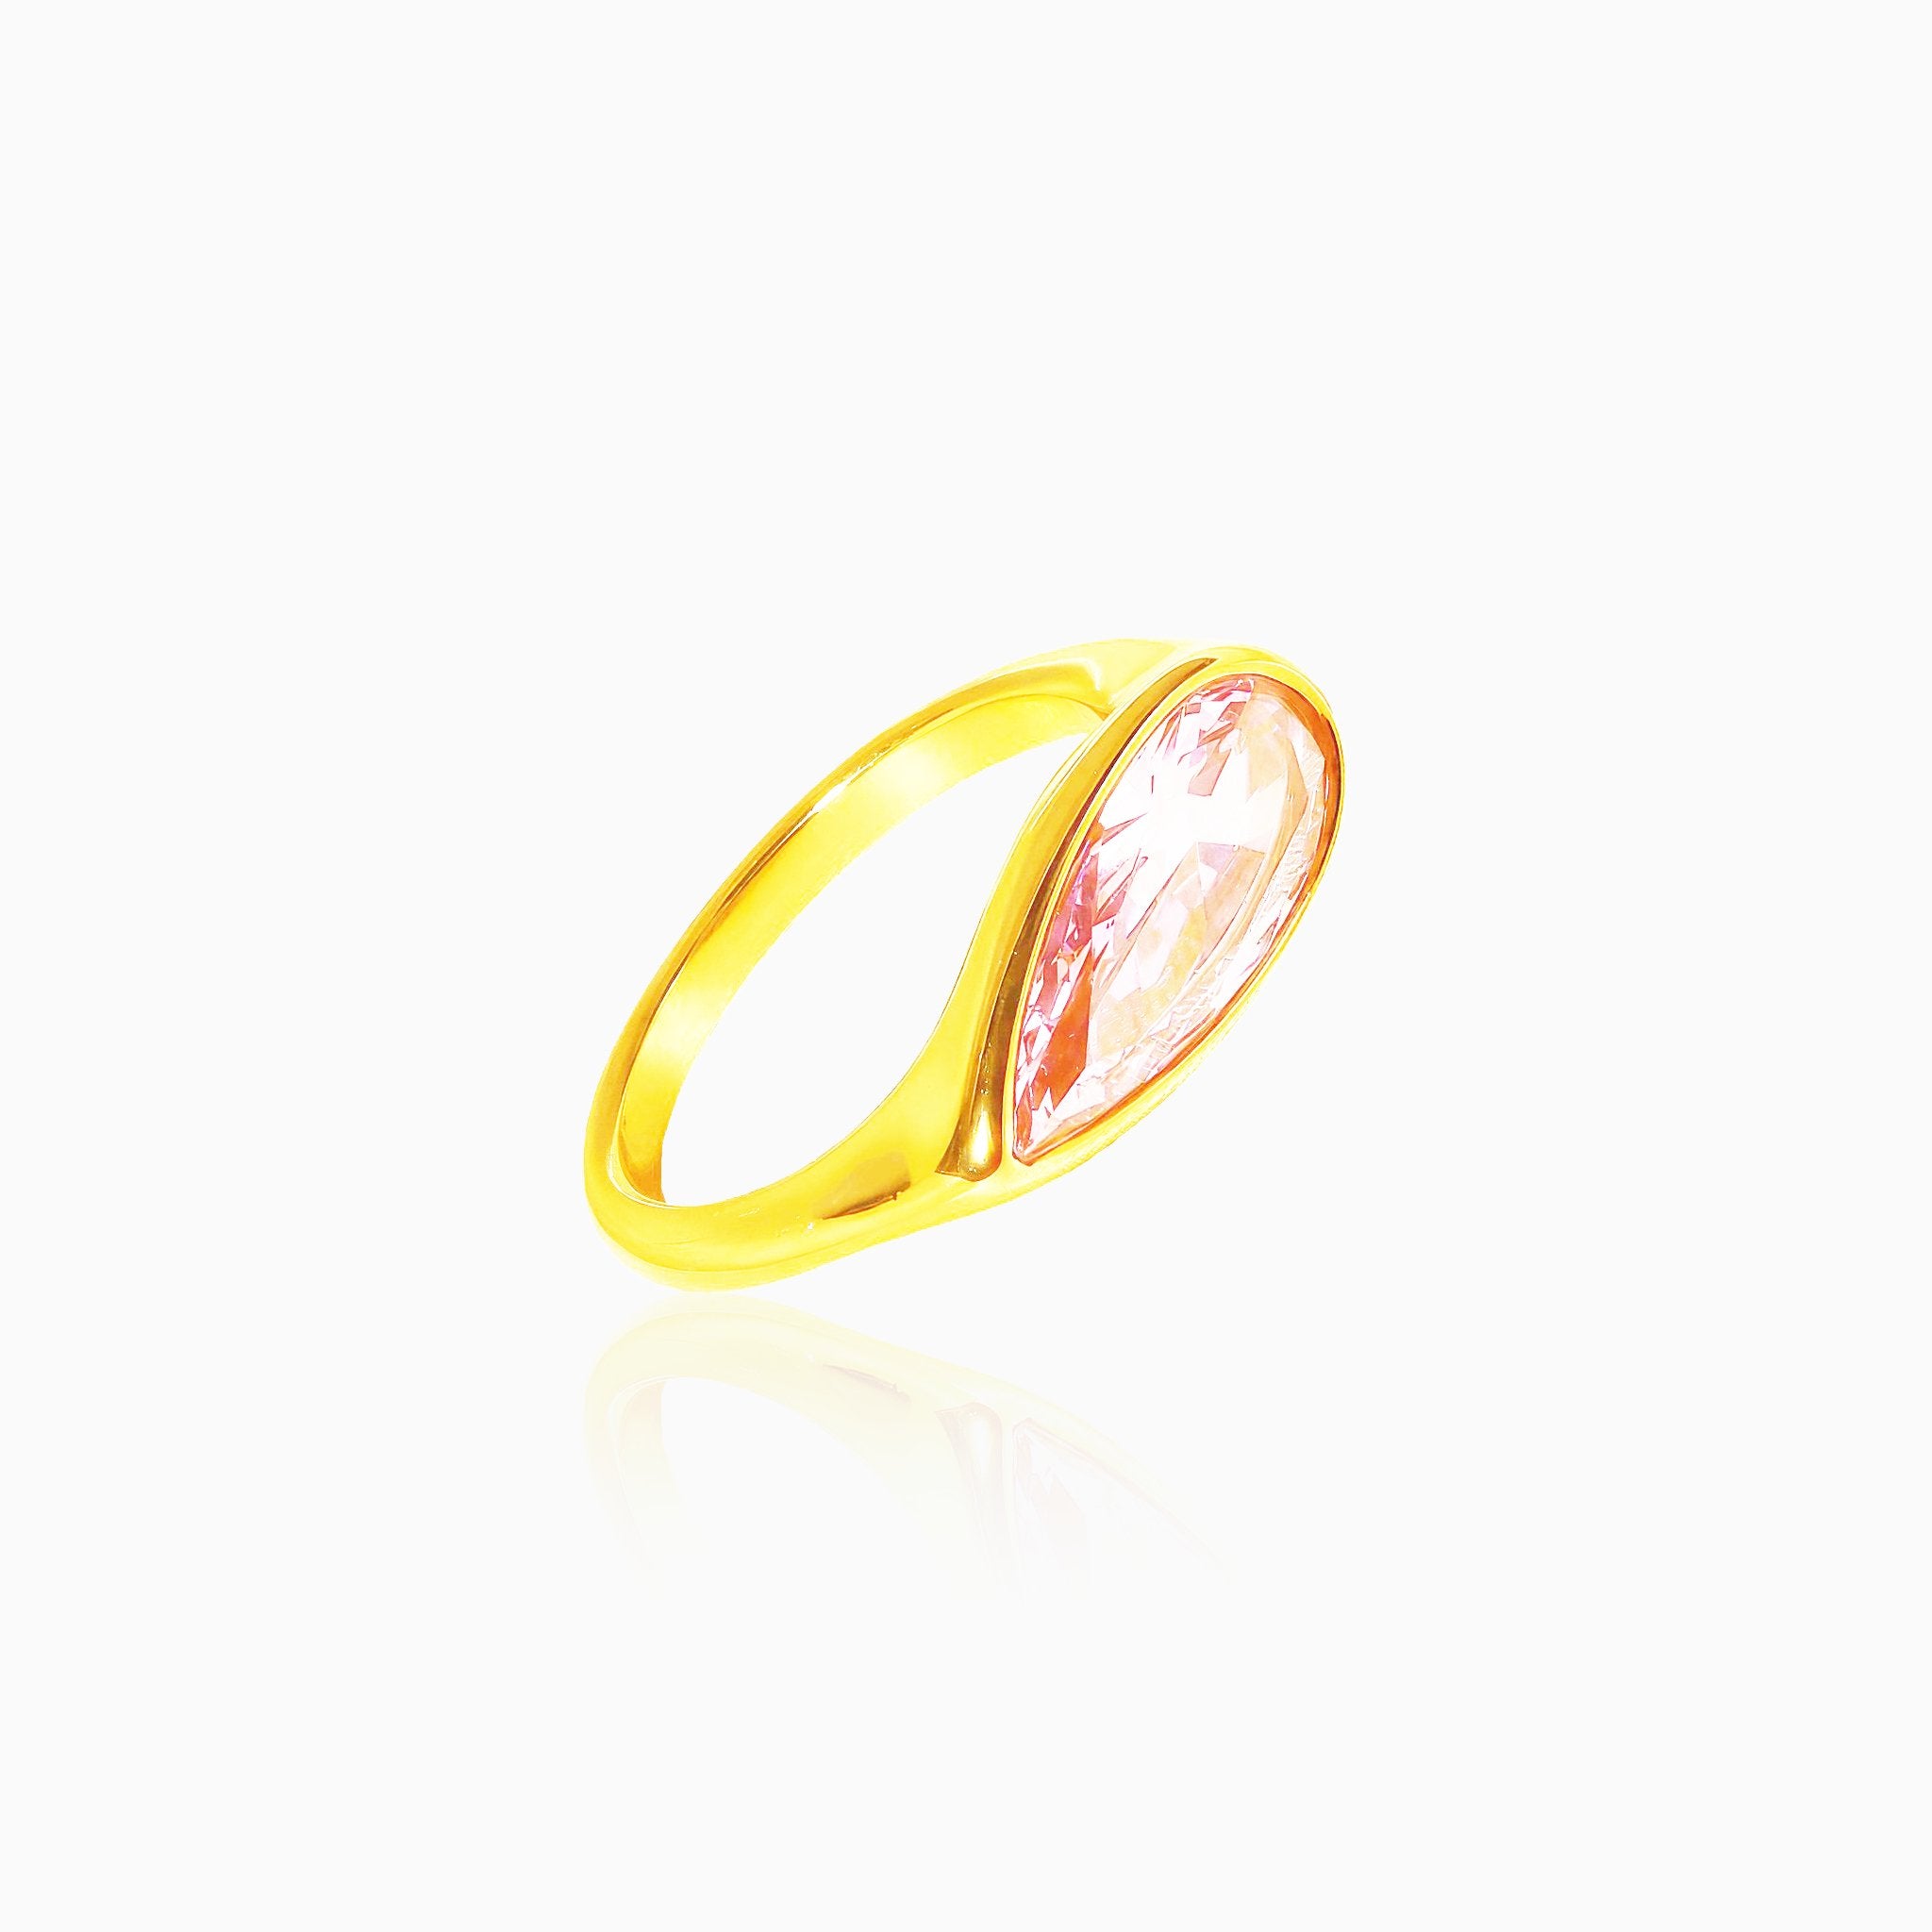 Oval Gemstone Ring with Pink Accent - Nobbier - Ring - 18K Gold And Titanium PVD Coated Jewelry